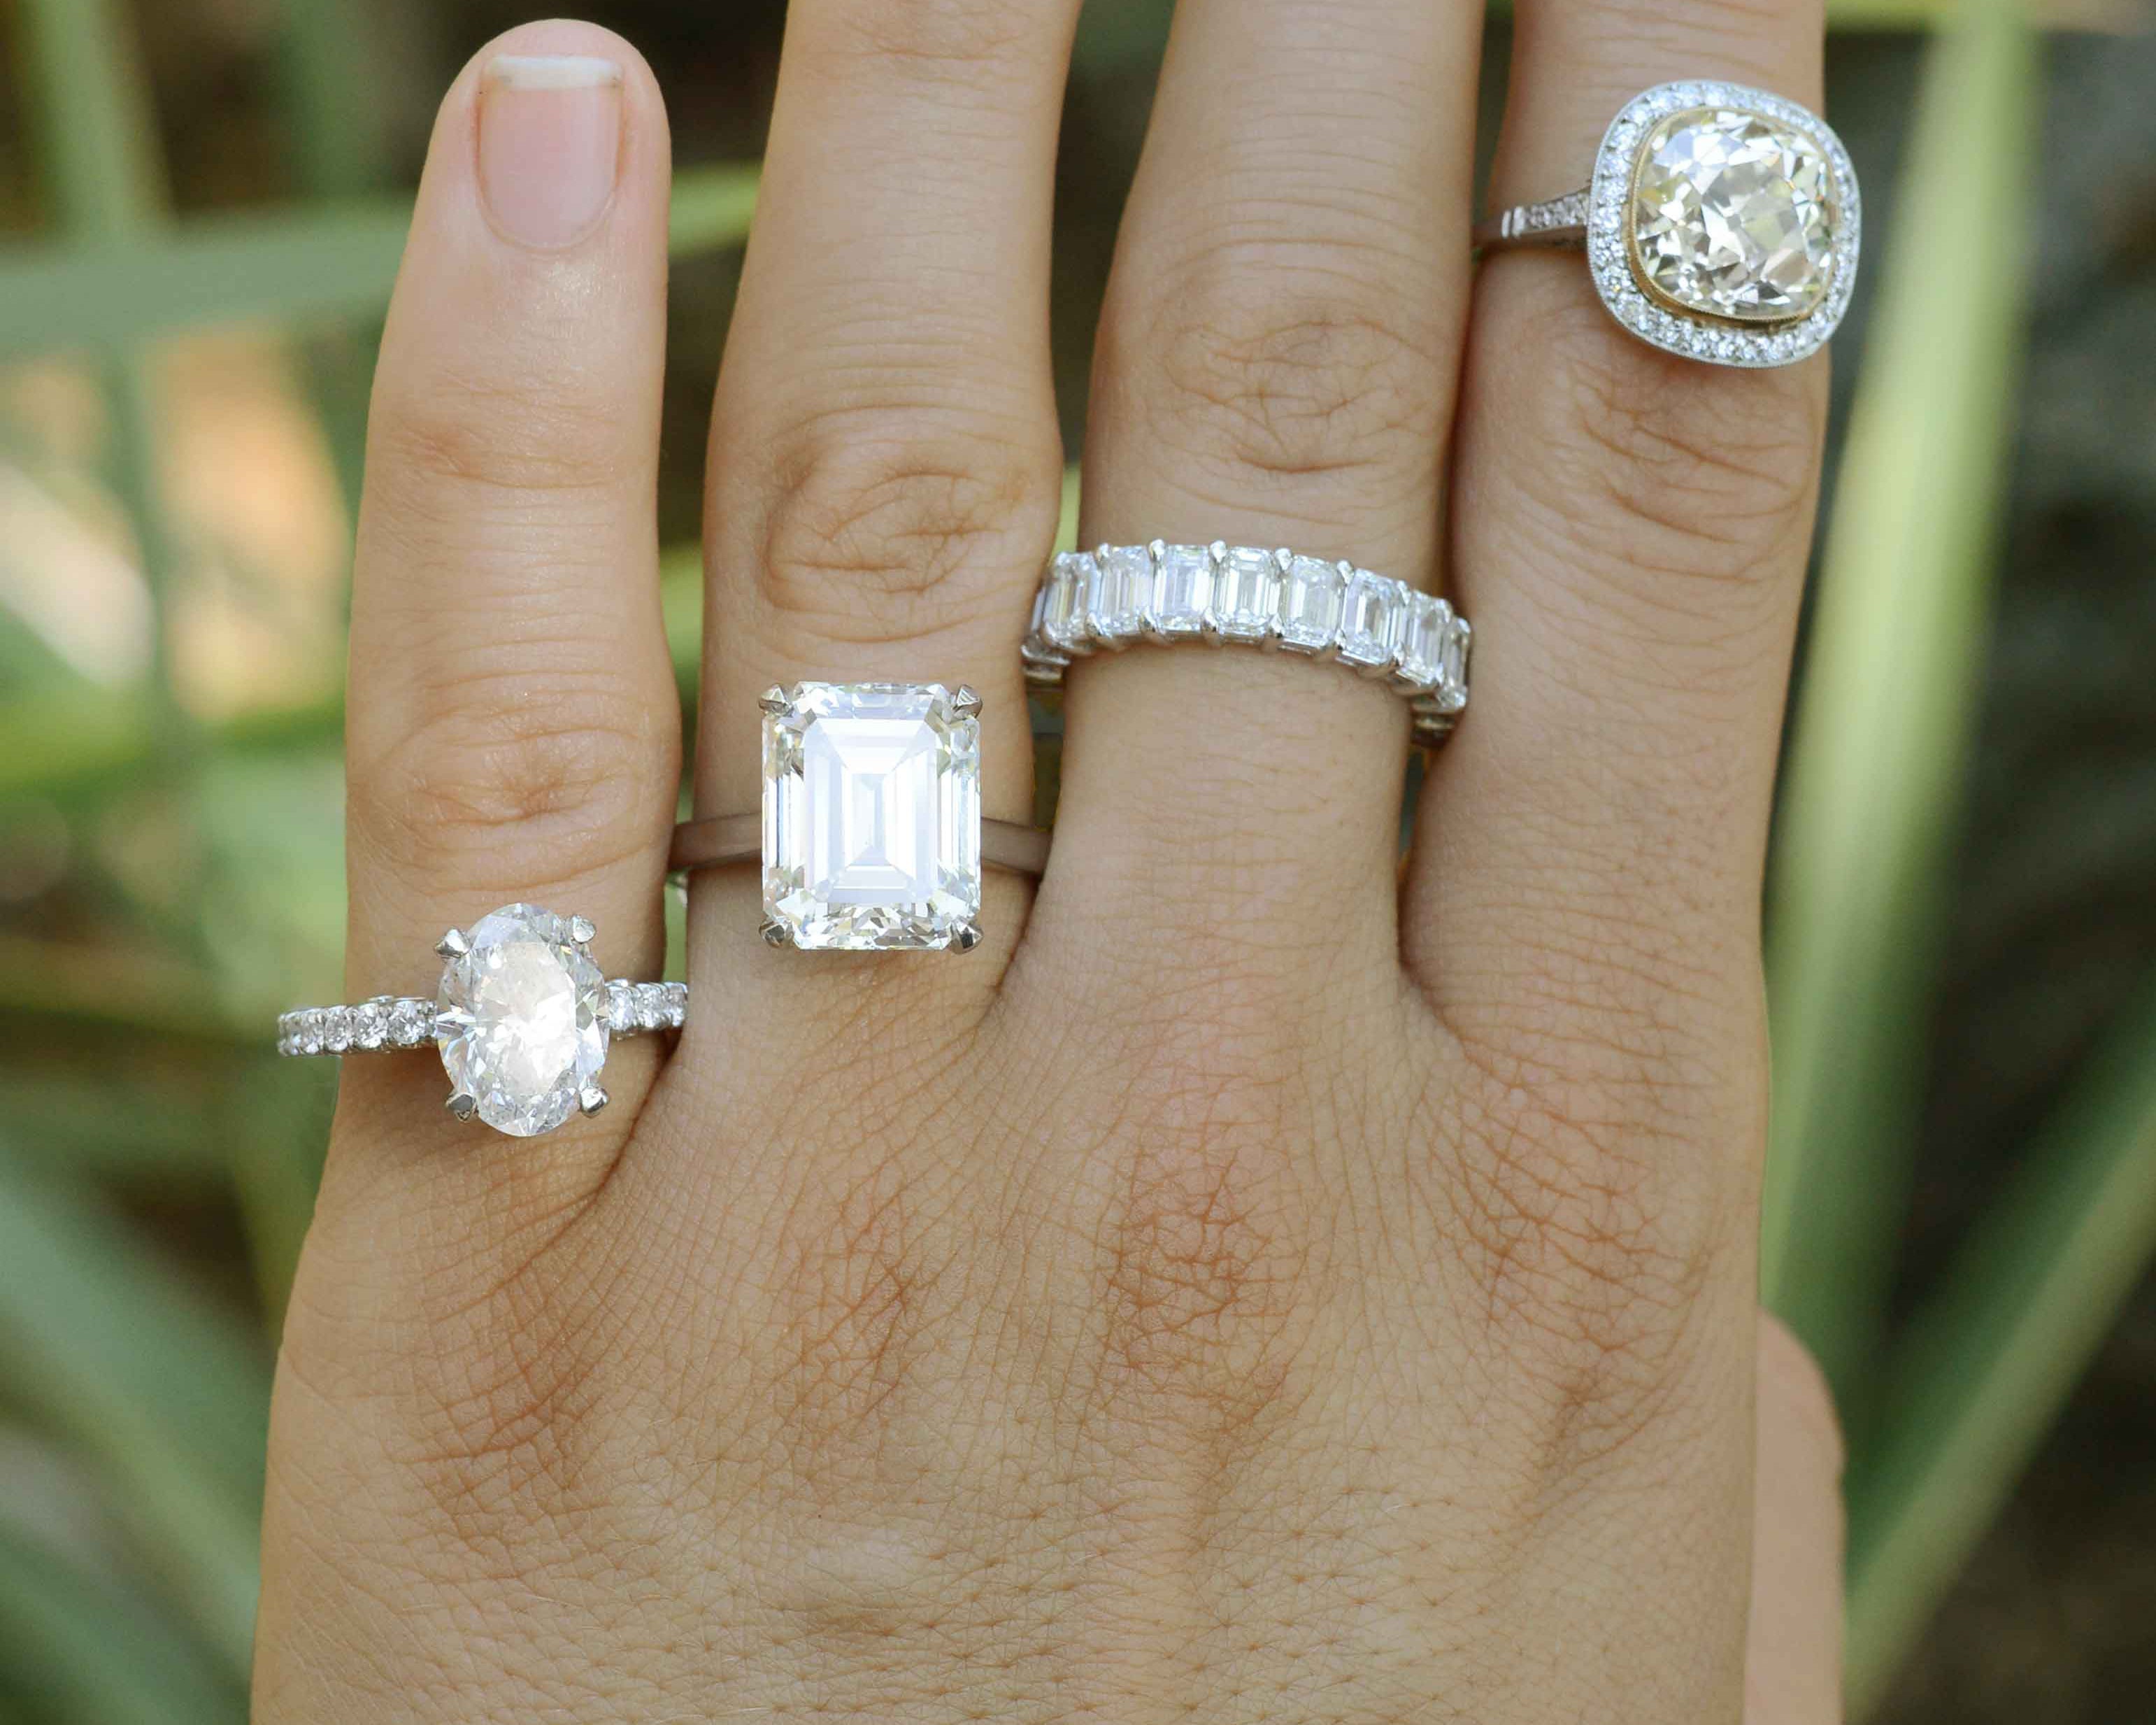 A colleciton of large diamond wedding and bridal rings.